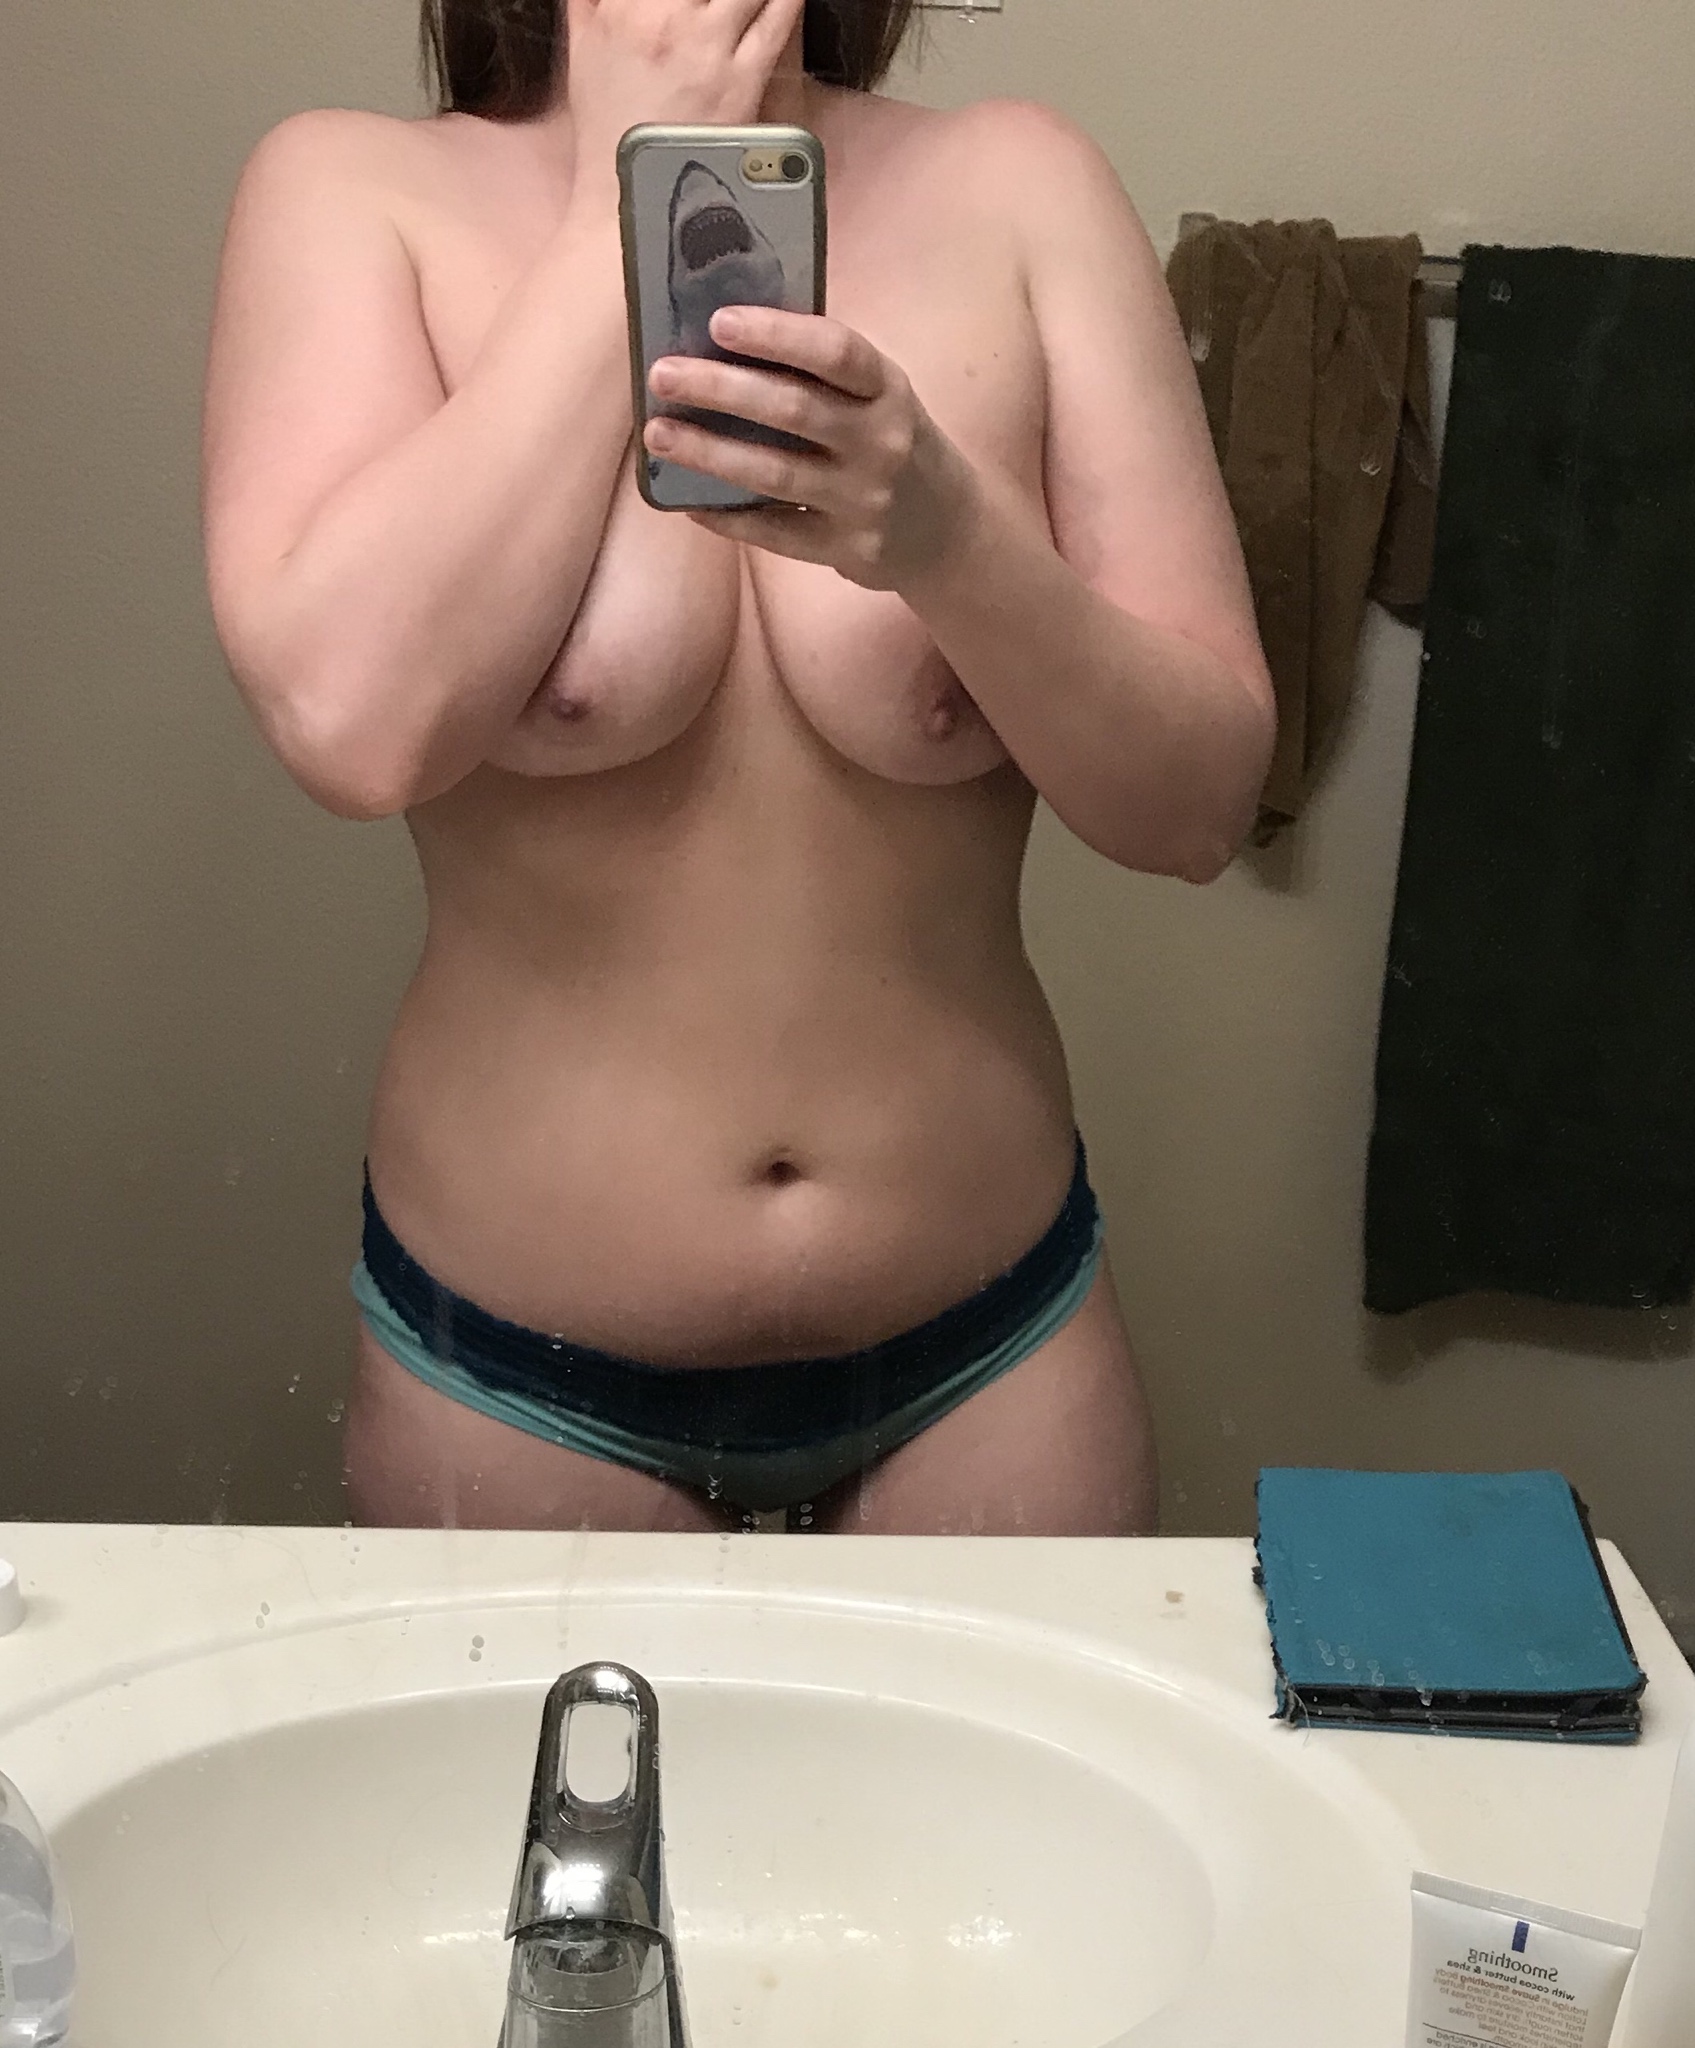 [F28] Post Workout Selfie Time!